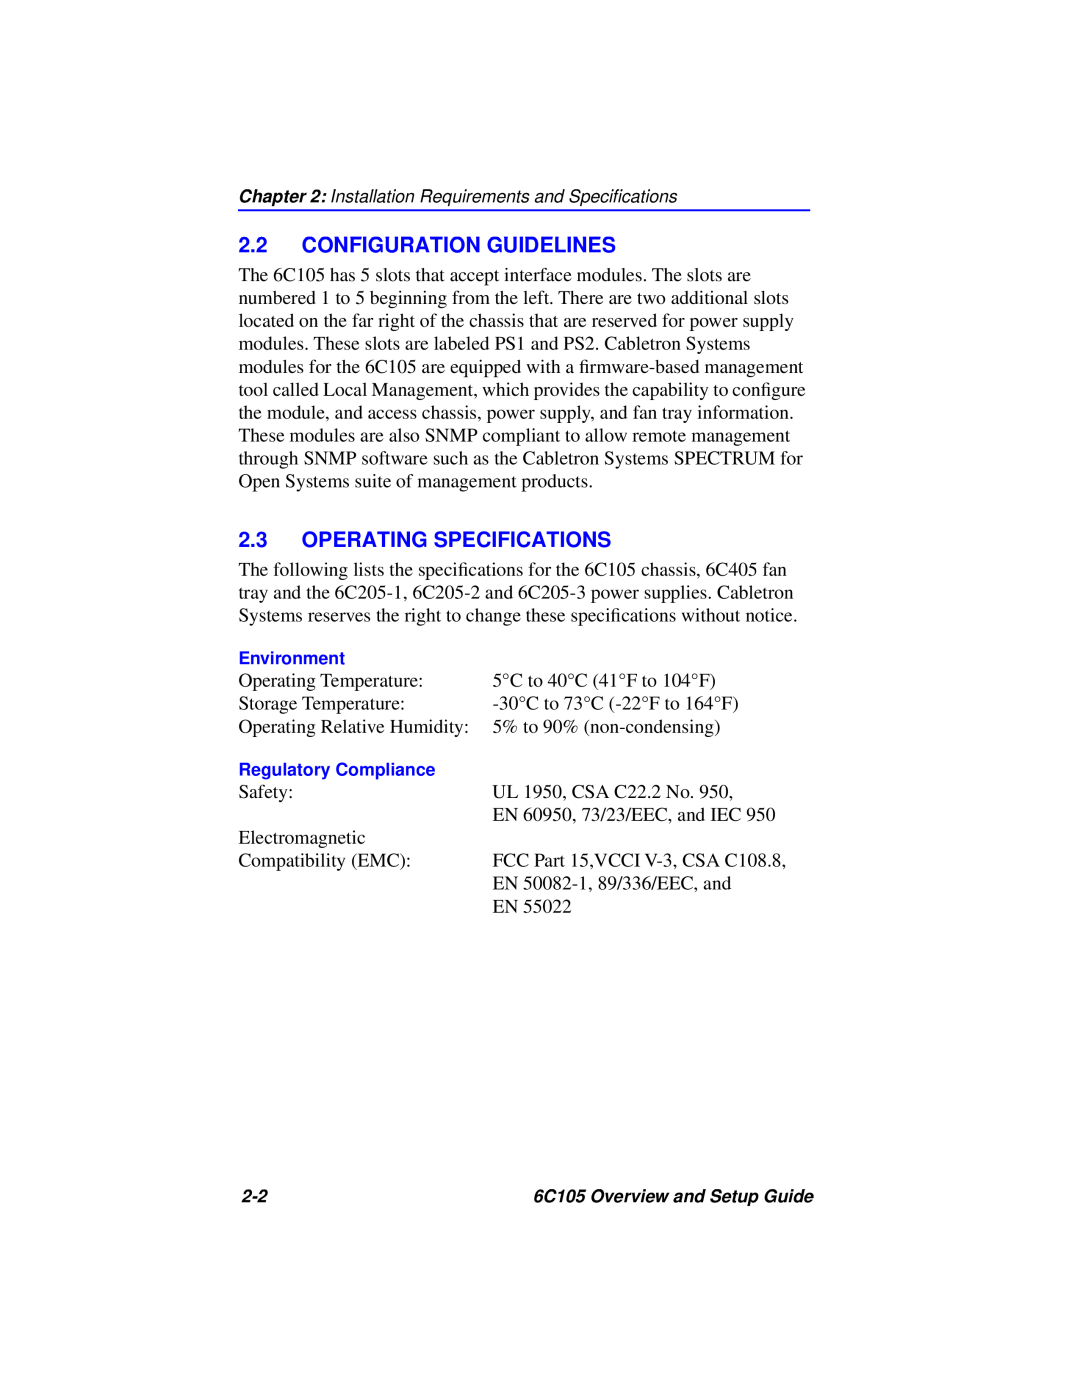 Cabletron Systems 6C105 setup guide Configuration Guidelines, Operating Specifications 